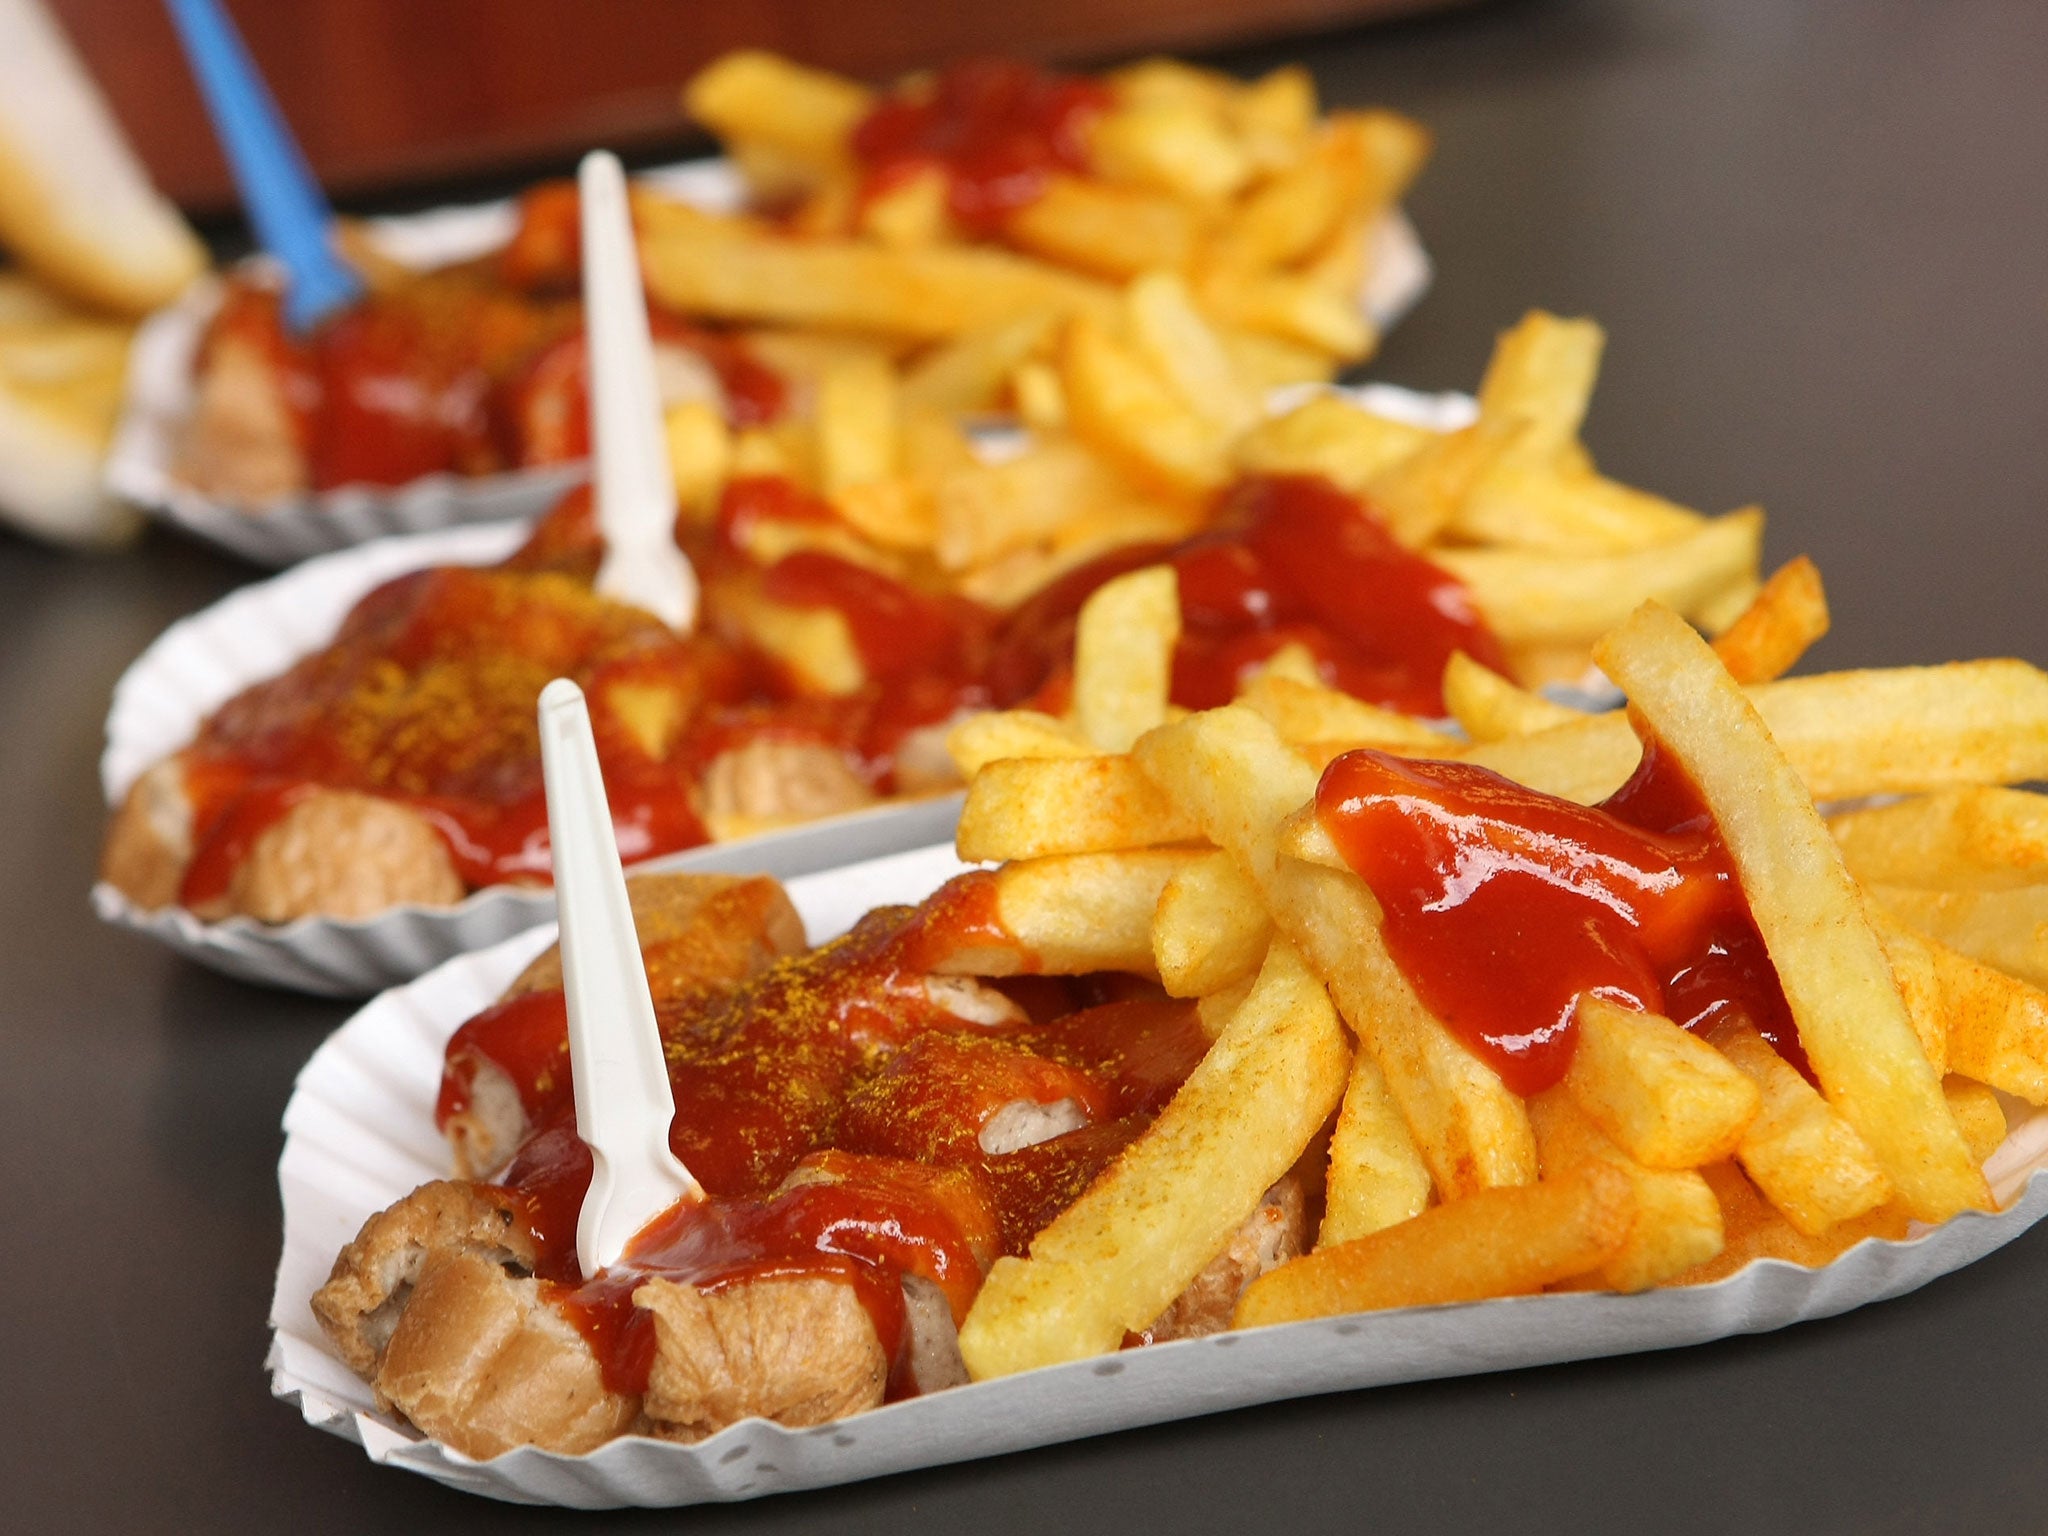 Chips are being consumed more than ever - but not in the once-popular combination of fish and chips